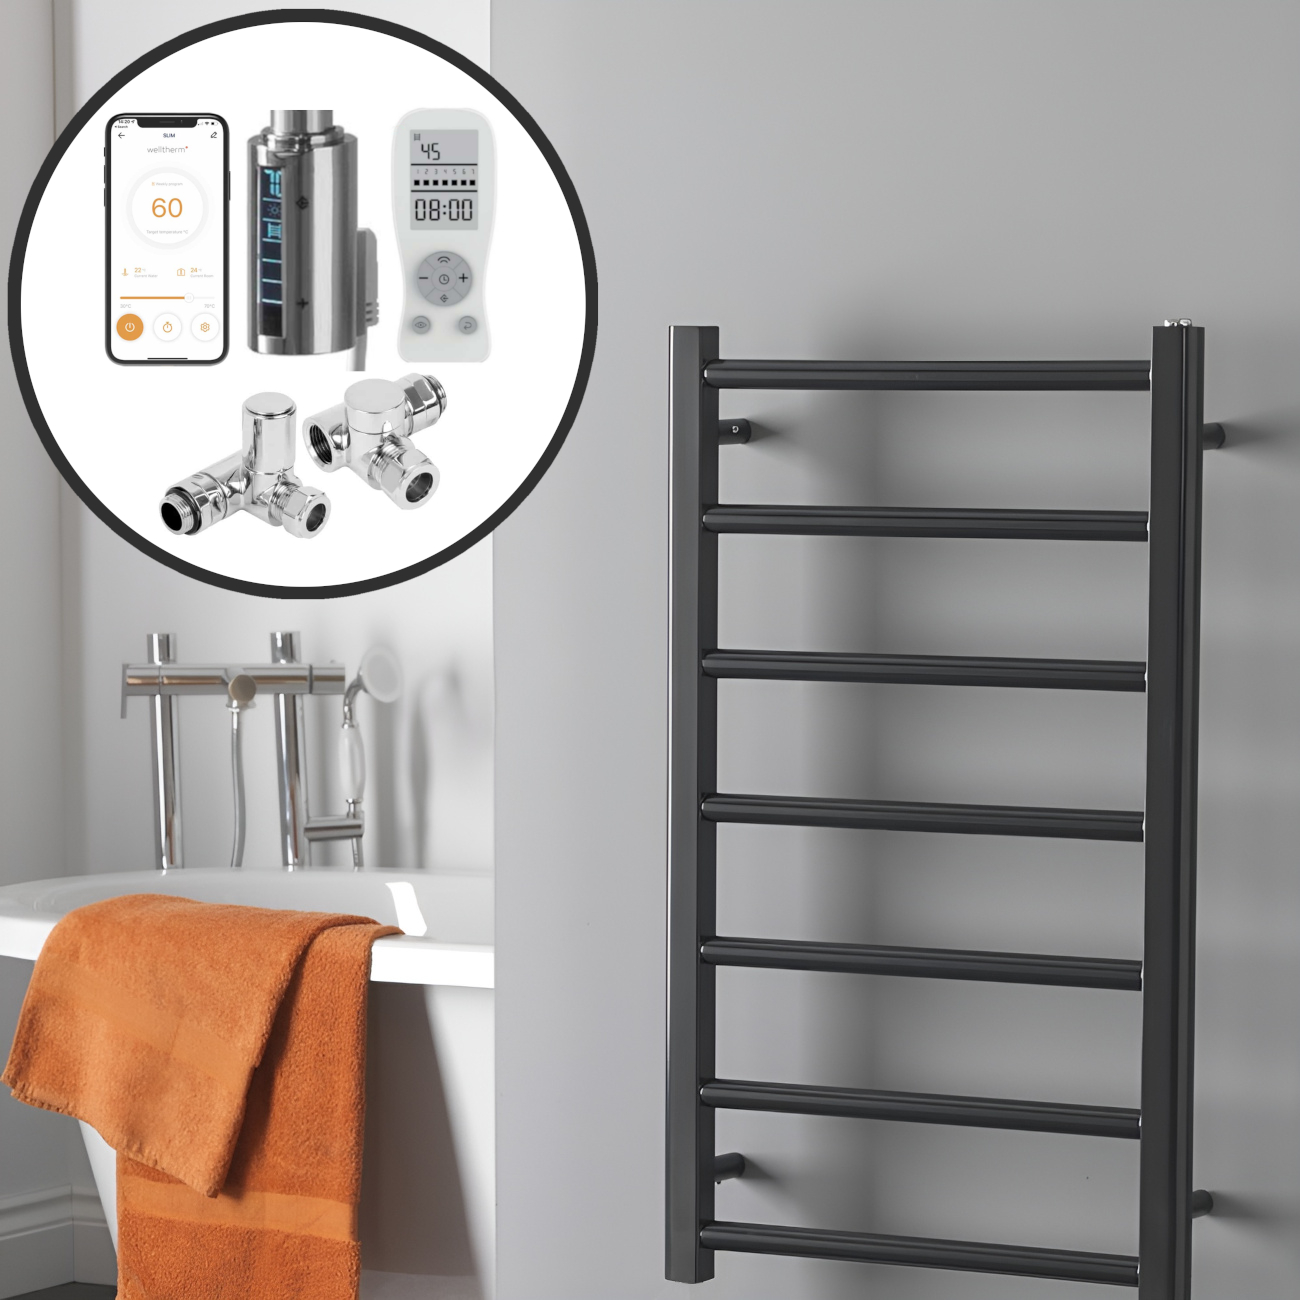 Alpine Anthracite | Dual Fuel Towel Rail with Thermostat, Timer + WiFi Control Best Quality & Price, Energy Saving / Economic To Run Buy Online From Adax SolAire UK Shop